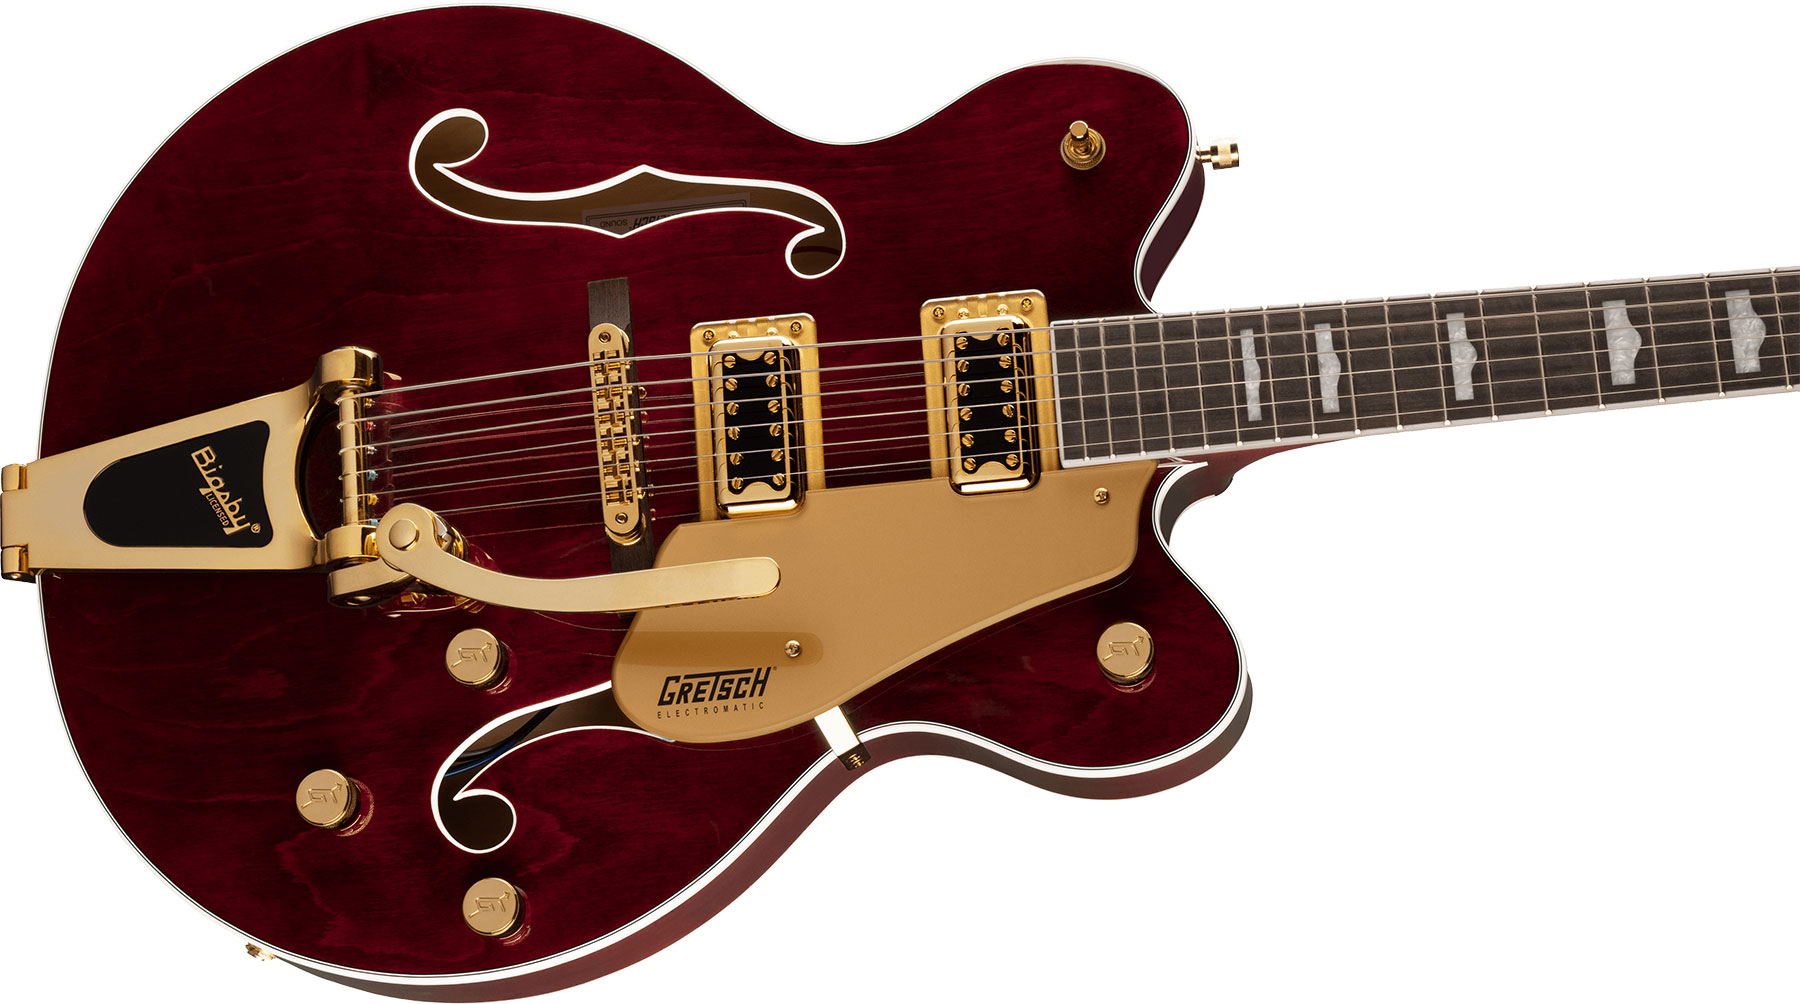 Gretsch G5422tg Electromatic Classic Hollow Body Dc Bigsby Hh Lau - Walnut Stain - Guitare Électrique 1/2 Caisse - Variation 2